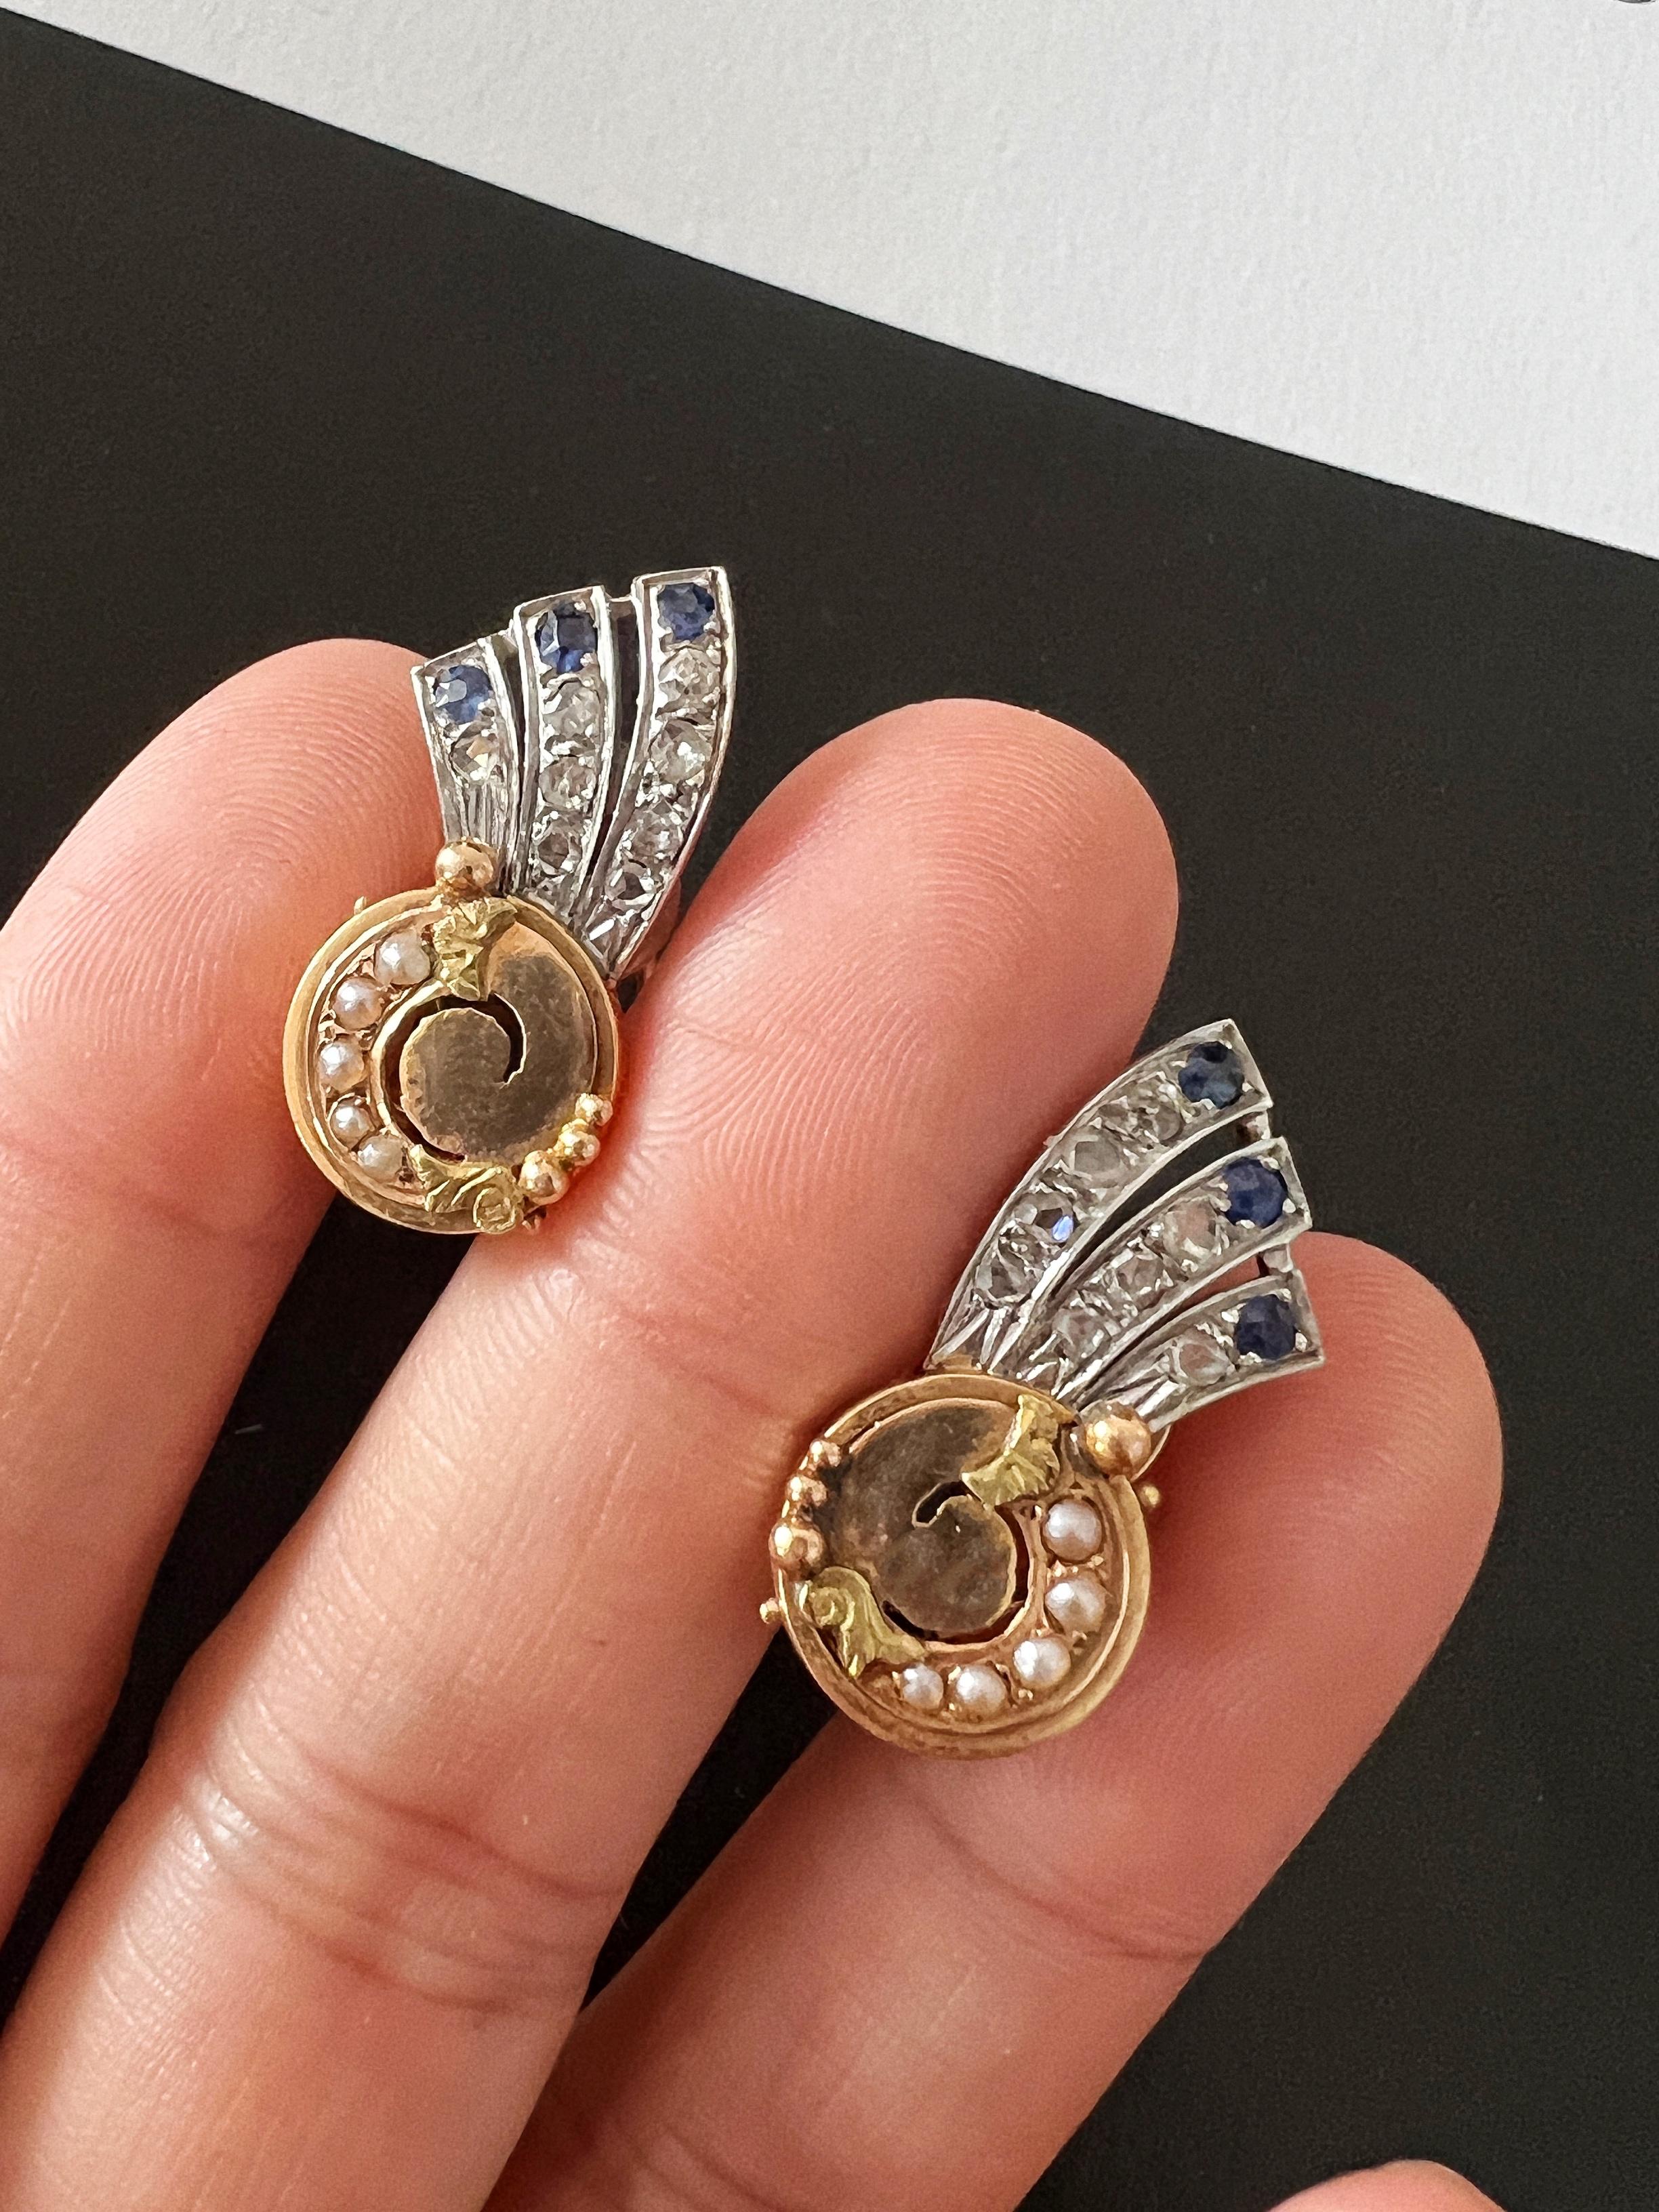 For sale a romantic pair of Art Deco-era earrings featuring shooting stars, crafted with impeccable attention to details.

The earrings are crafted in 18K white gold, yellow gold, and green gold, creating a beautiful contrast that catches the eye.